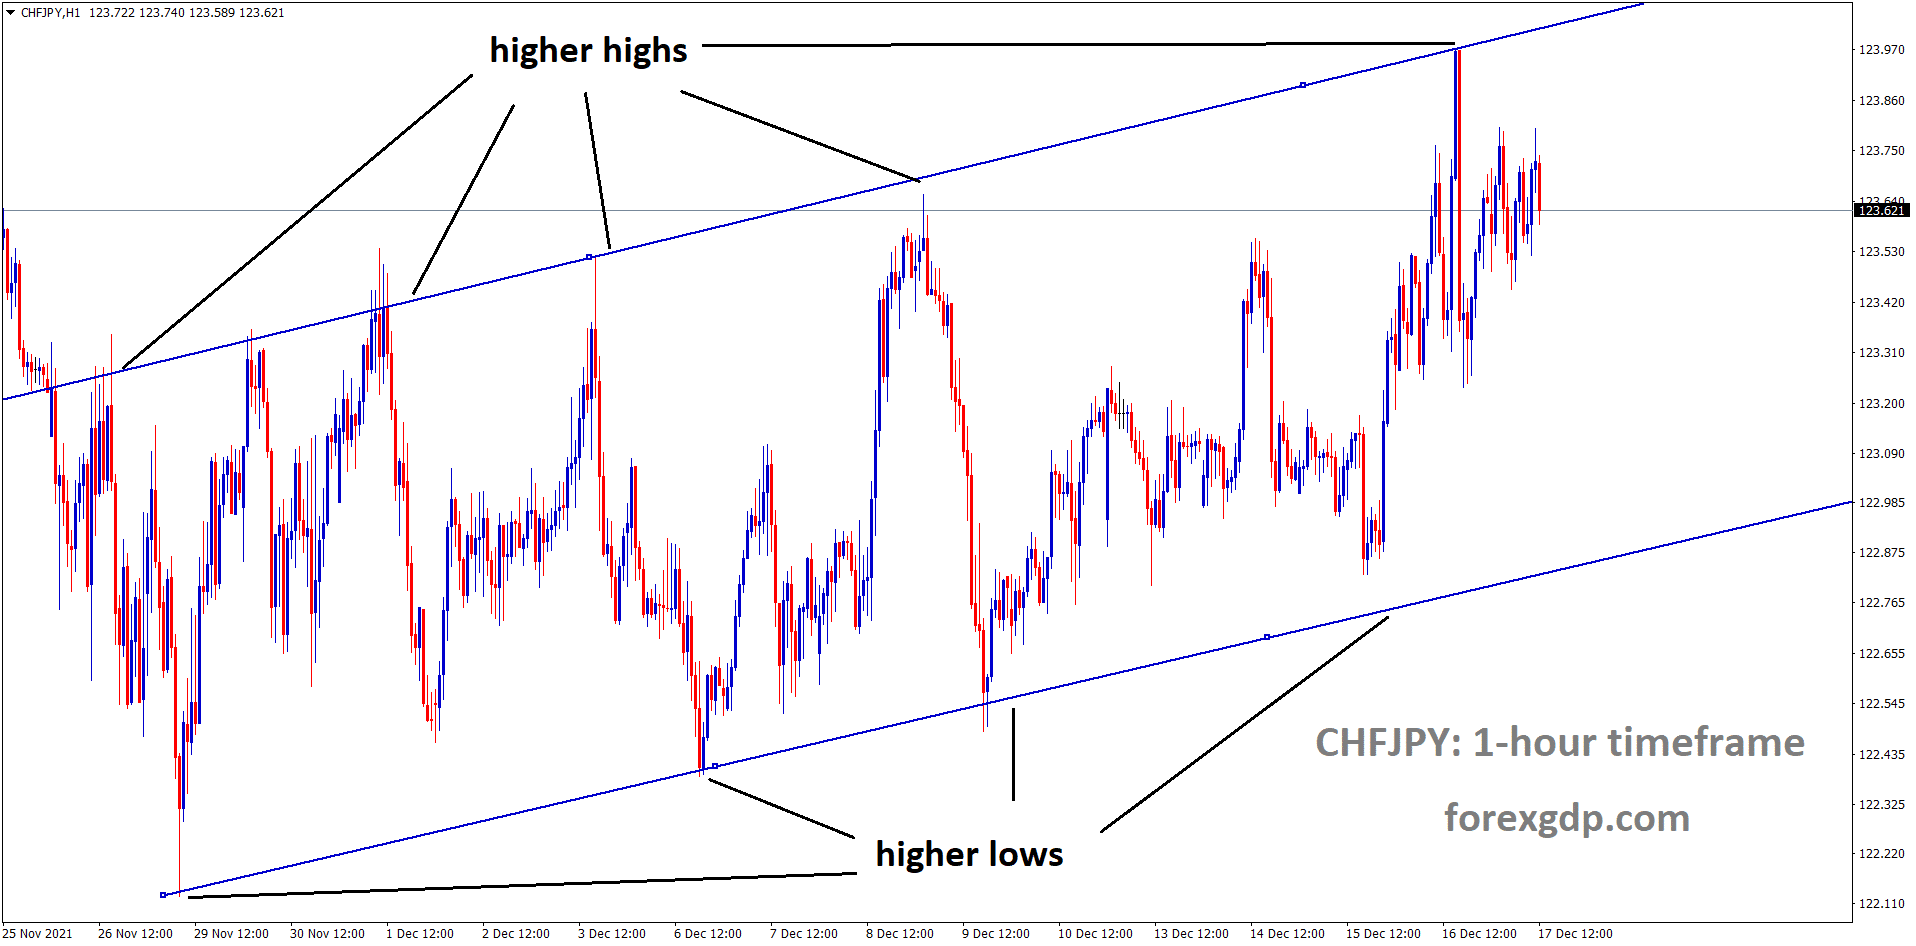 CHFJPY is moving in an Ascending channel and the market consolidated at the higher high area of the channel